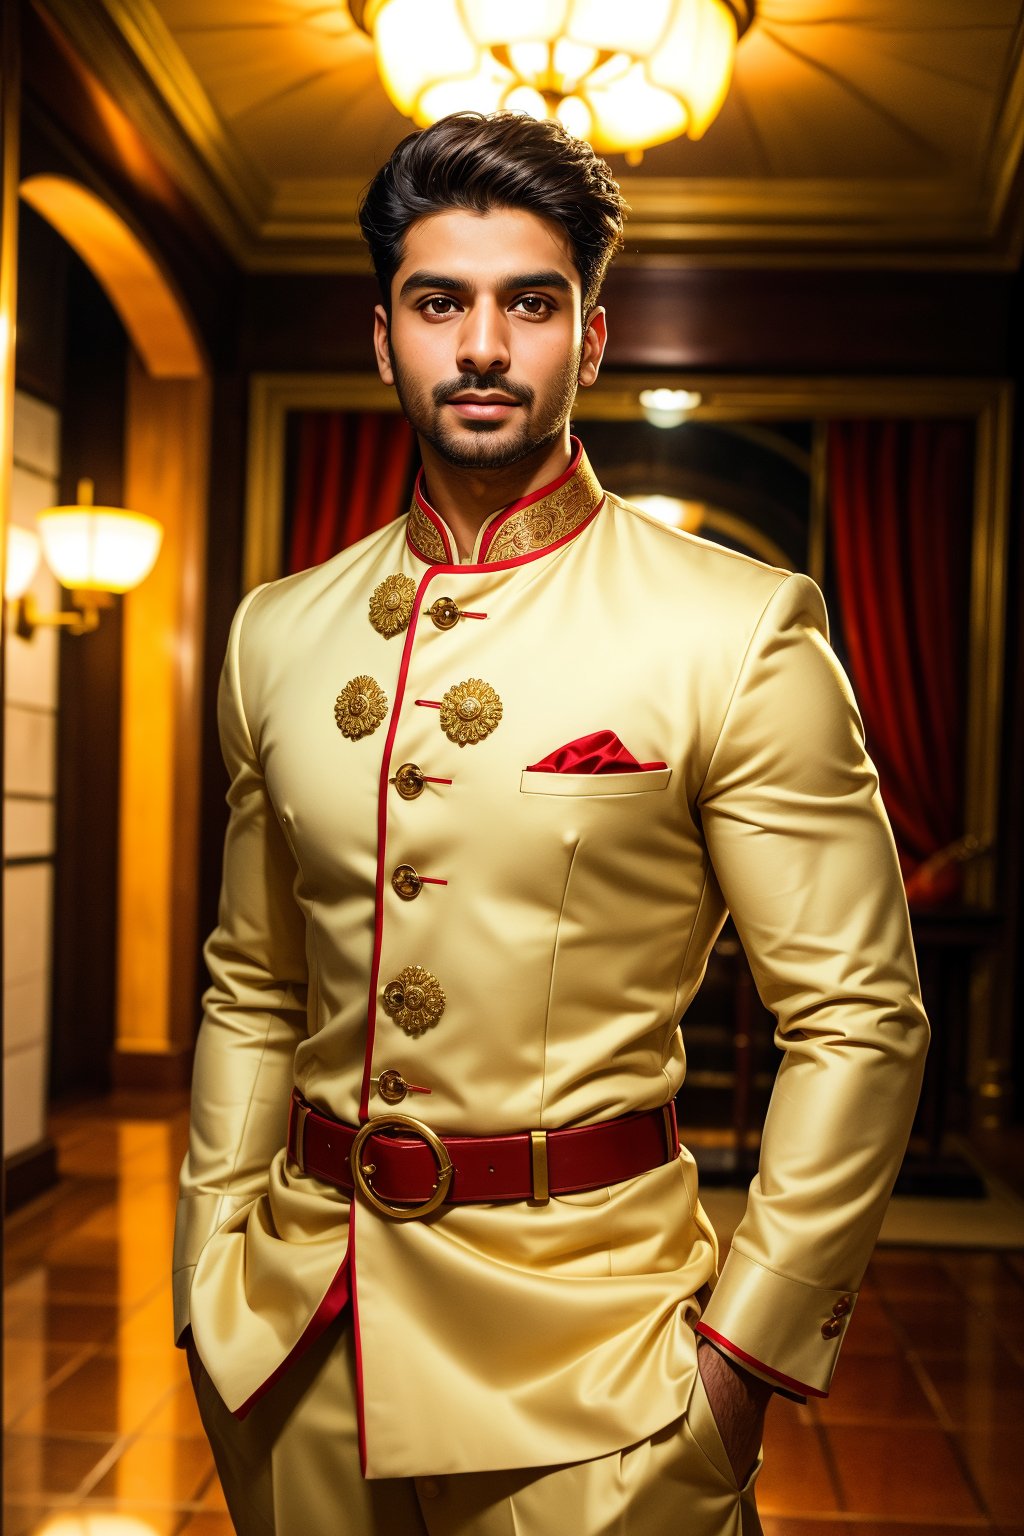 Create a digital artwork of a man inspired by the photography style of Indian actors. The image should capture the essence of classic Bollywood glamour, with the subject exuding confidence and charisma. The man should be dressed in traditional Indian attire, such as a kurta or sherwani, and posed in a way that highlights his strong features and poised demeanor. The background should be elegant and complement the subject, perhaps with subtle hints of Indian architecture or cultural motifs. Pay attention to lighting and composition to evoke the polished and sophisticated feel of professional actor photography.